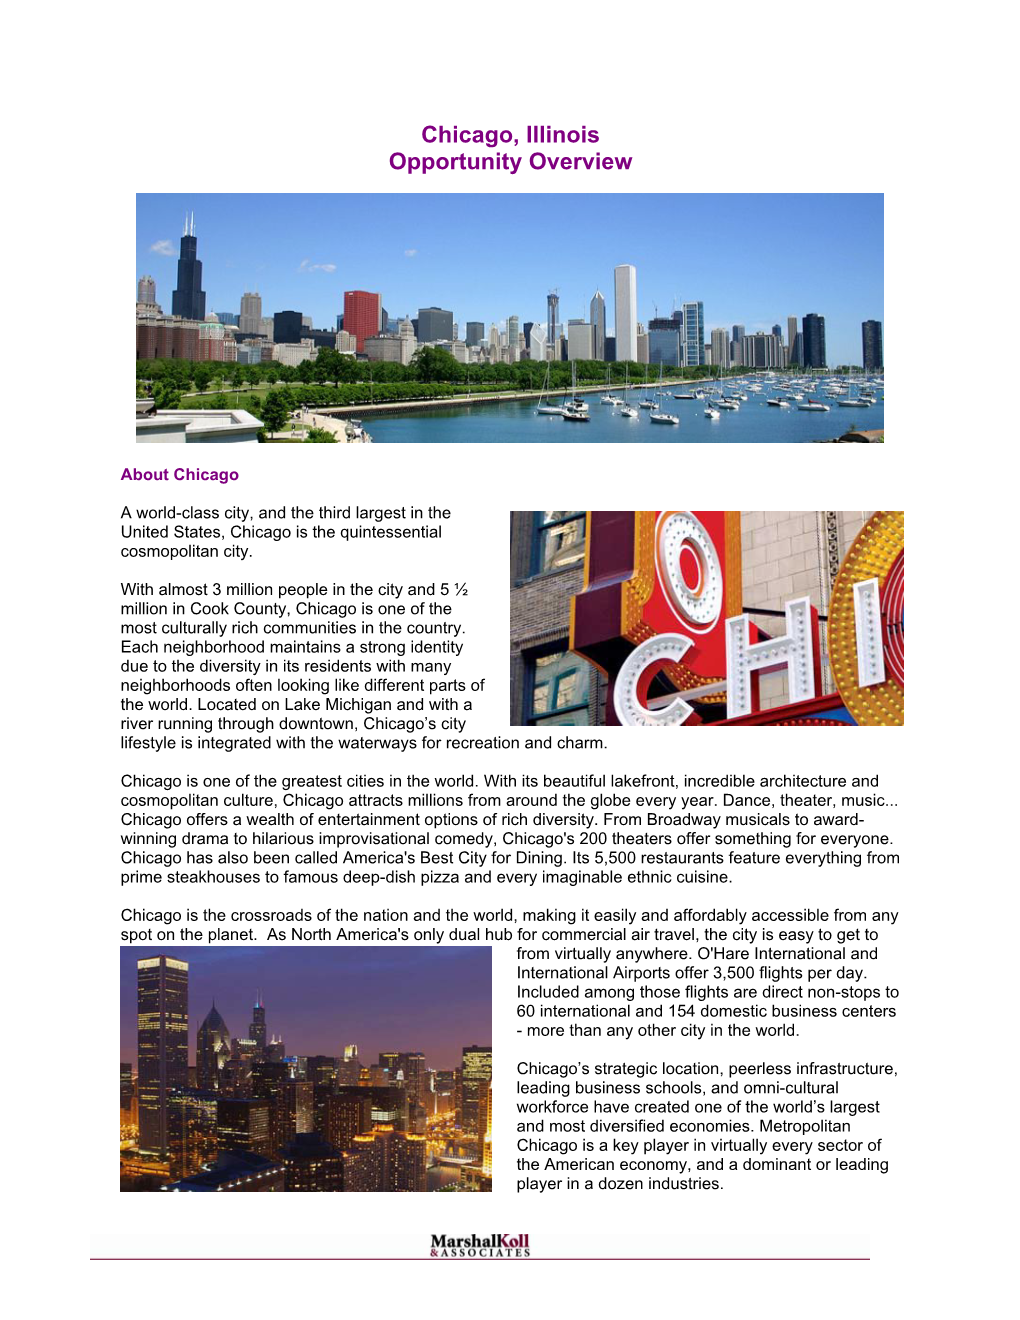 Chicago, Illinois Opportunity Overview